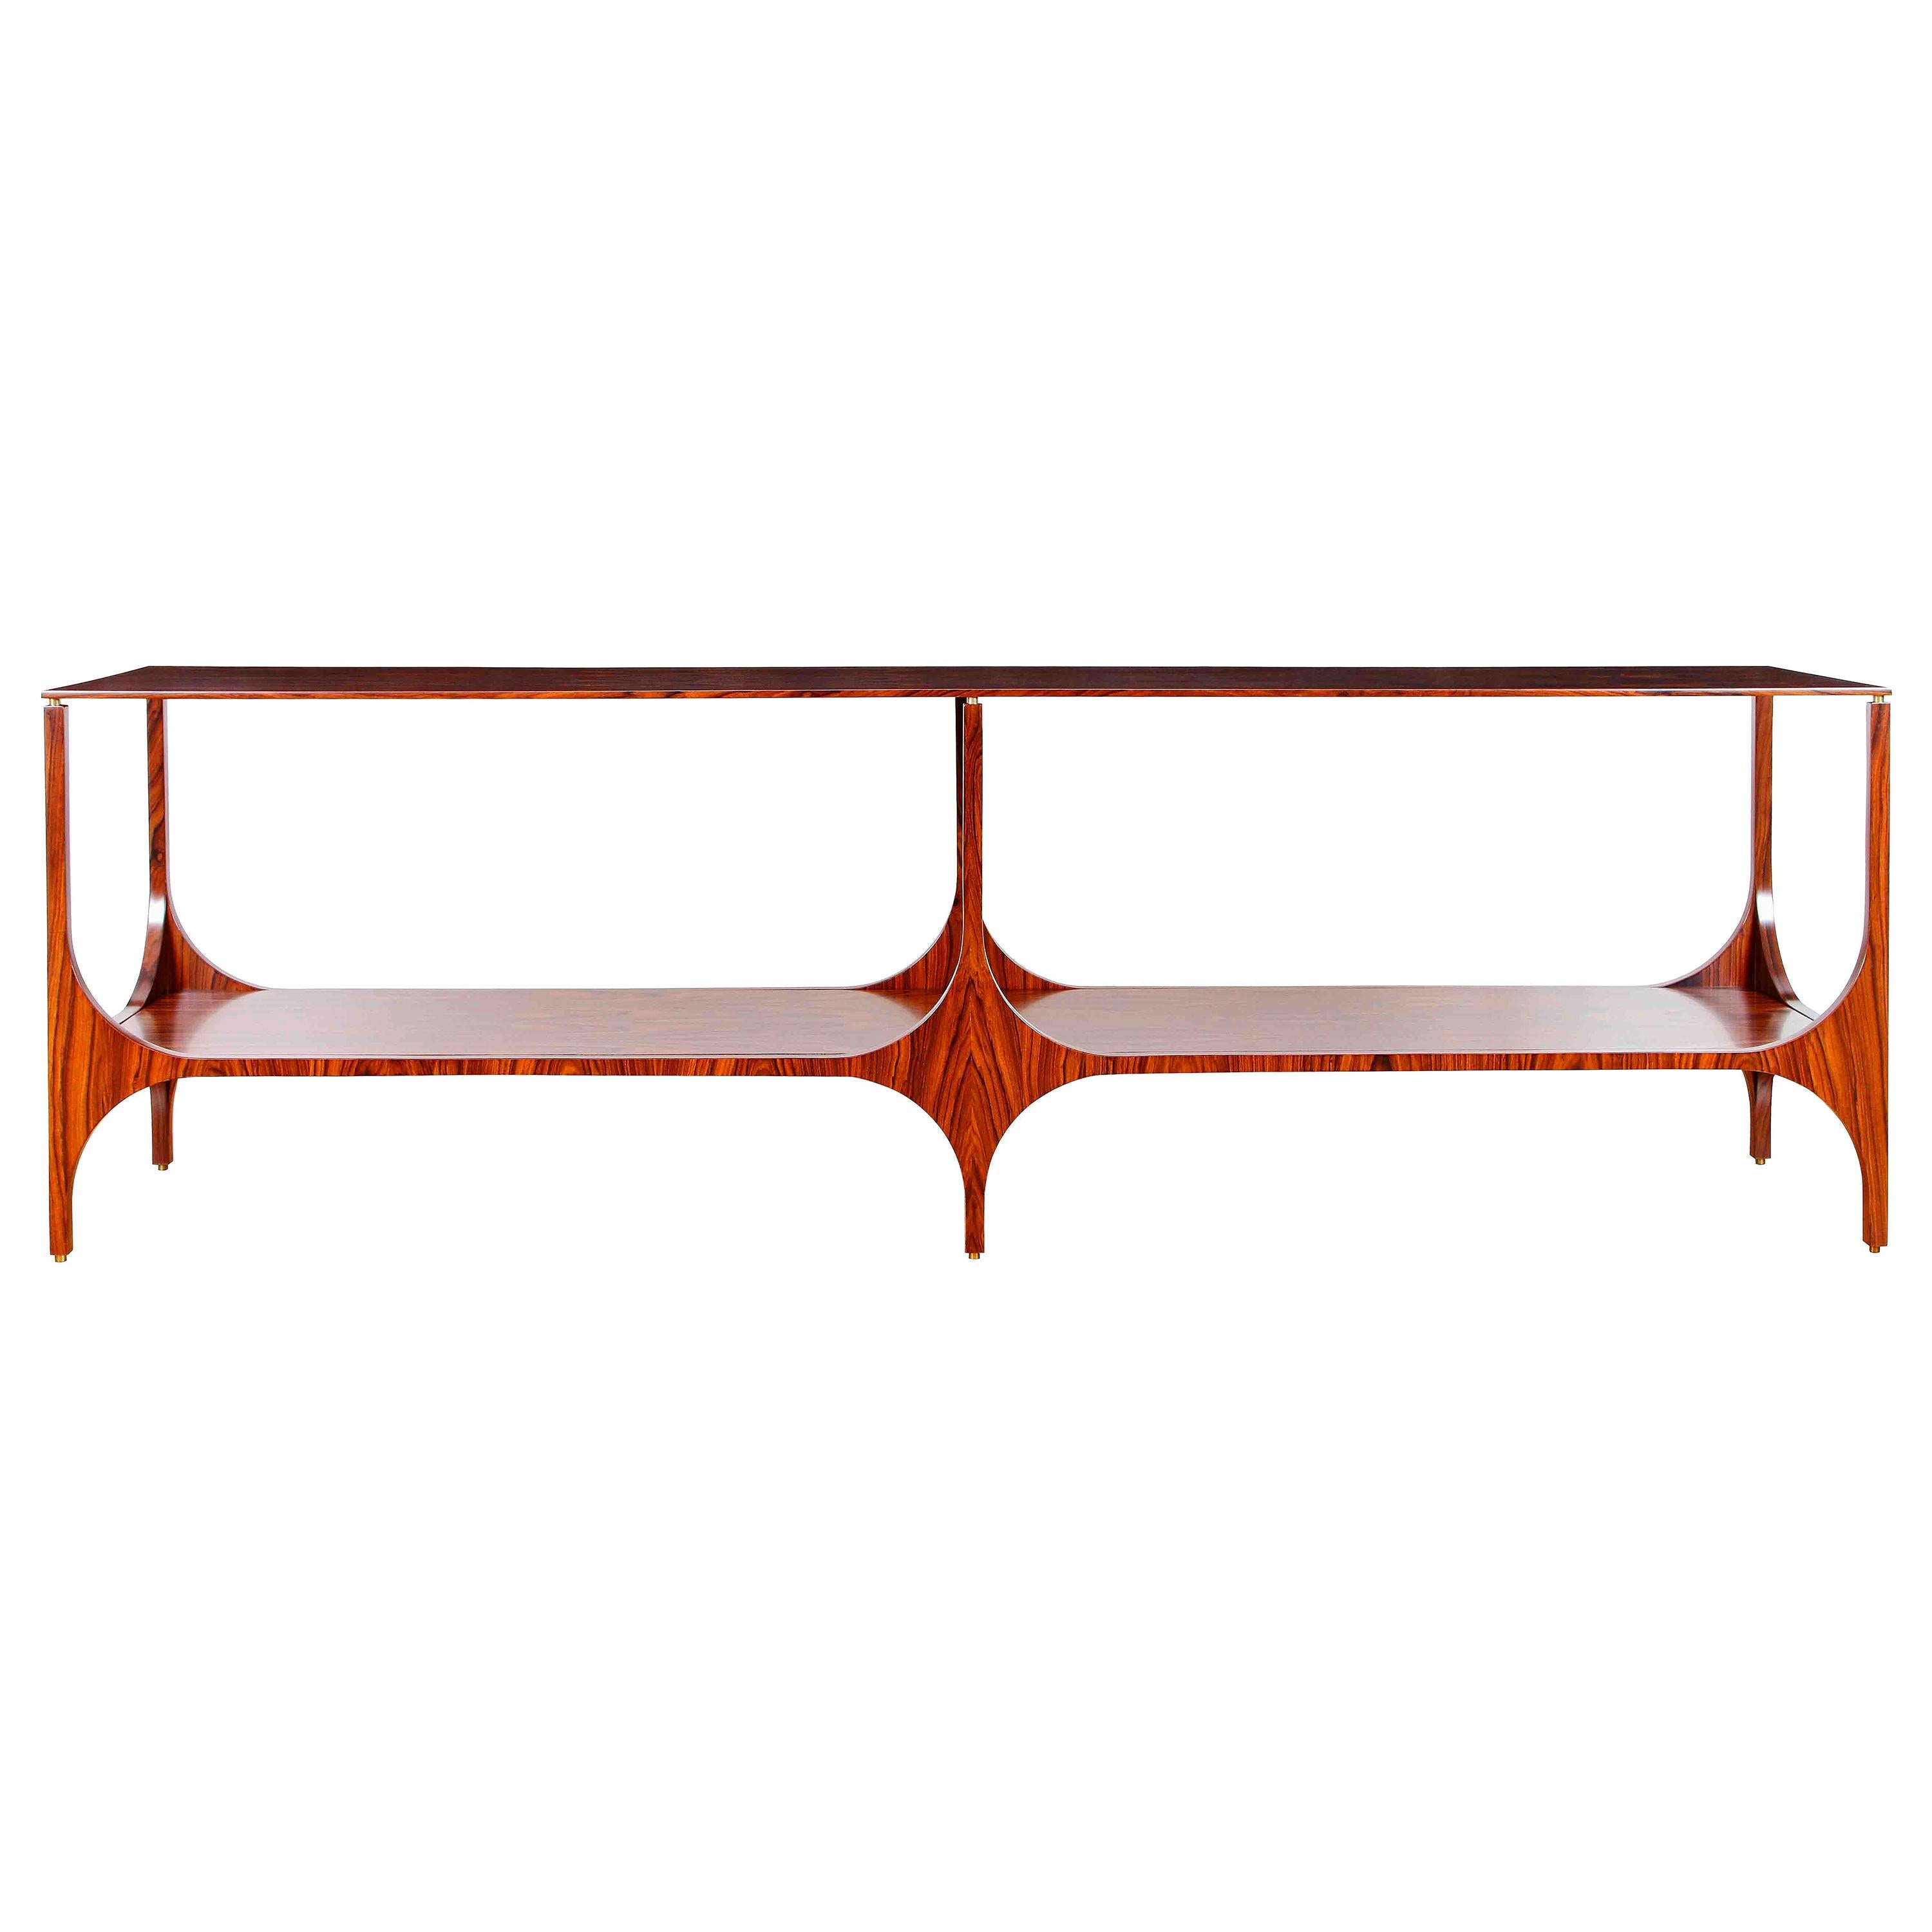 "1960" Contemporary Console Table in Pau Ferro Wood by Bruno Rangel For Sale